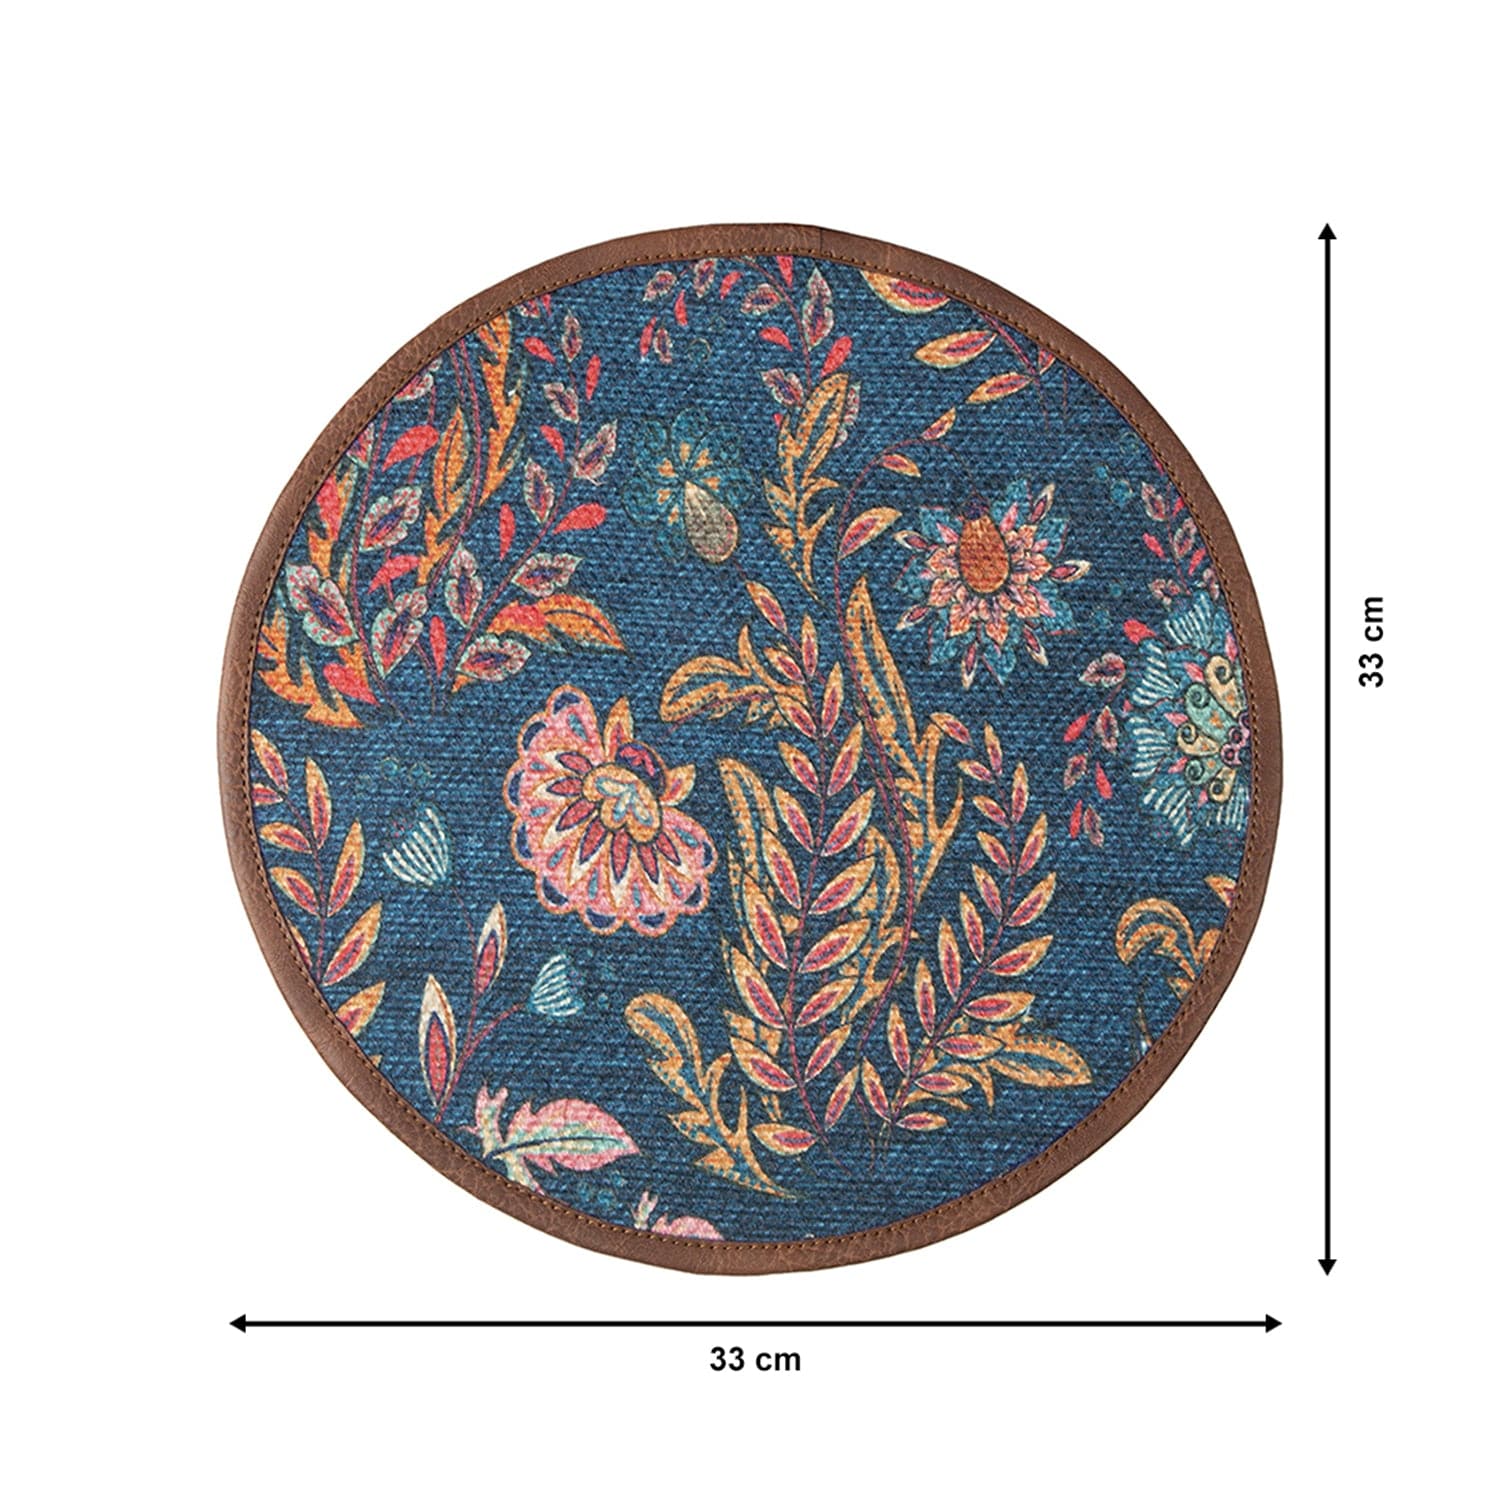 Mona B Set of 2 Printed Mosaic Placemats, 13 INCH Round, Best for Bed-Side Table/Center Table, Dining Table/Shelves (Amelia) - Placemat by Mona-B - Backpack, Flat30, New Arrivals, Sale, Shop1999, Shop2999, Shop3999